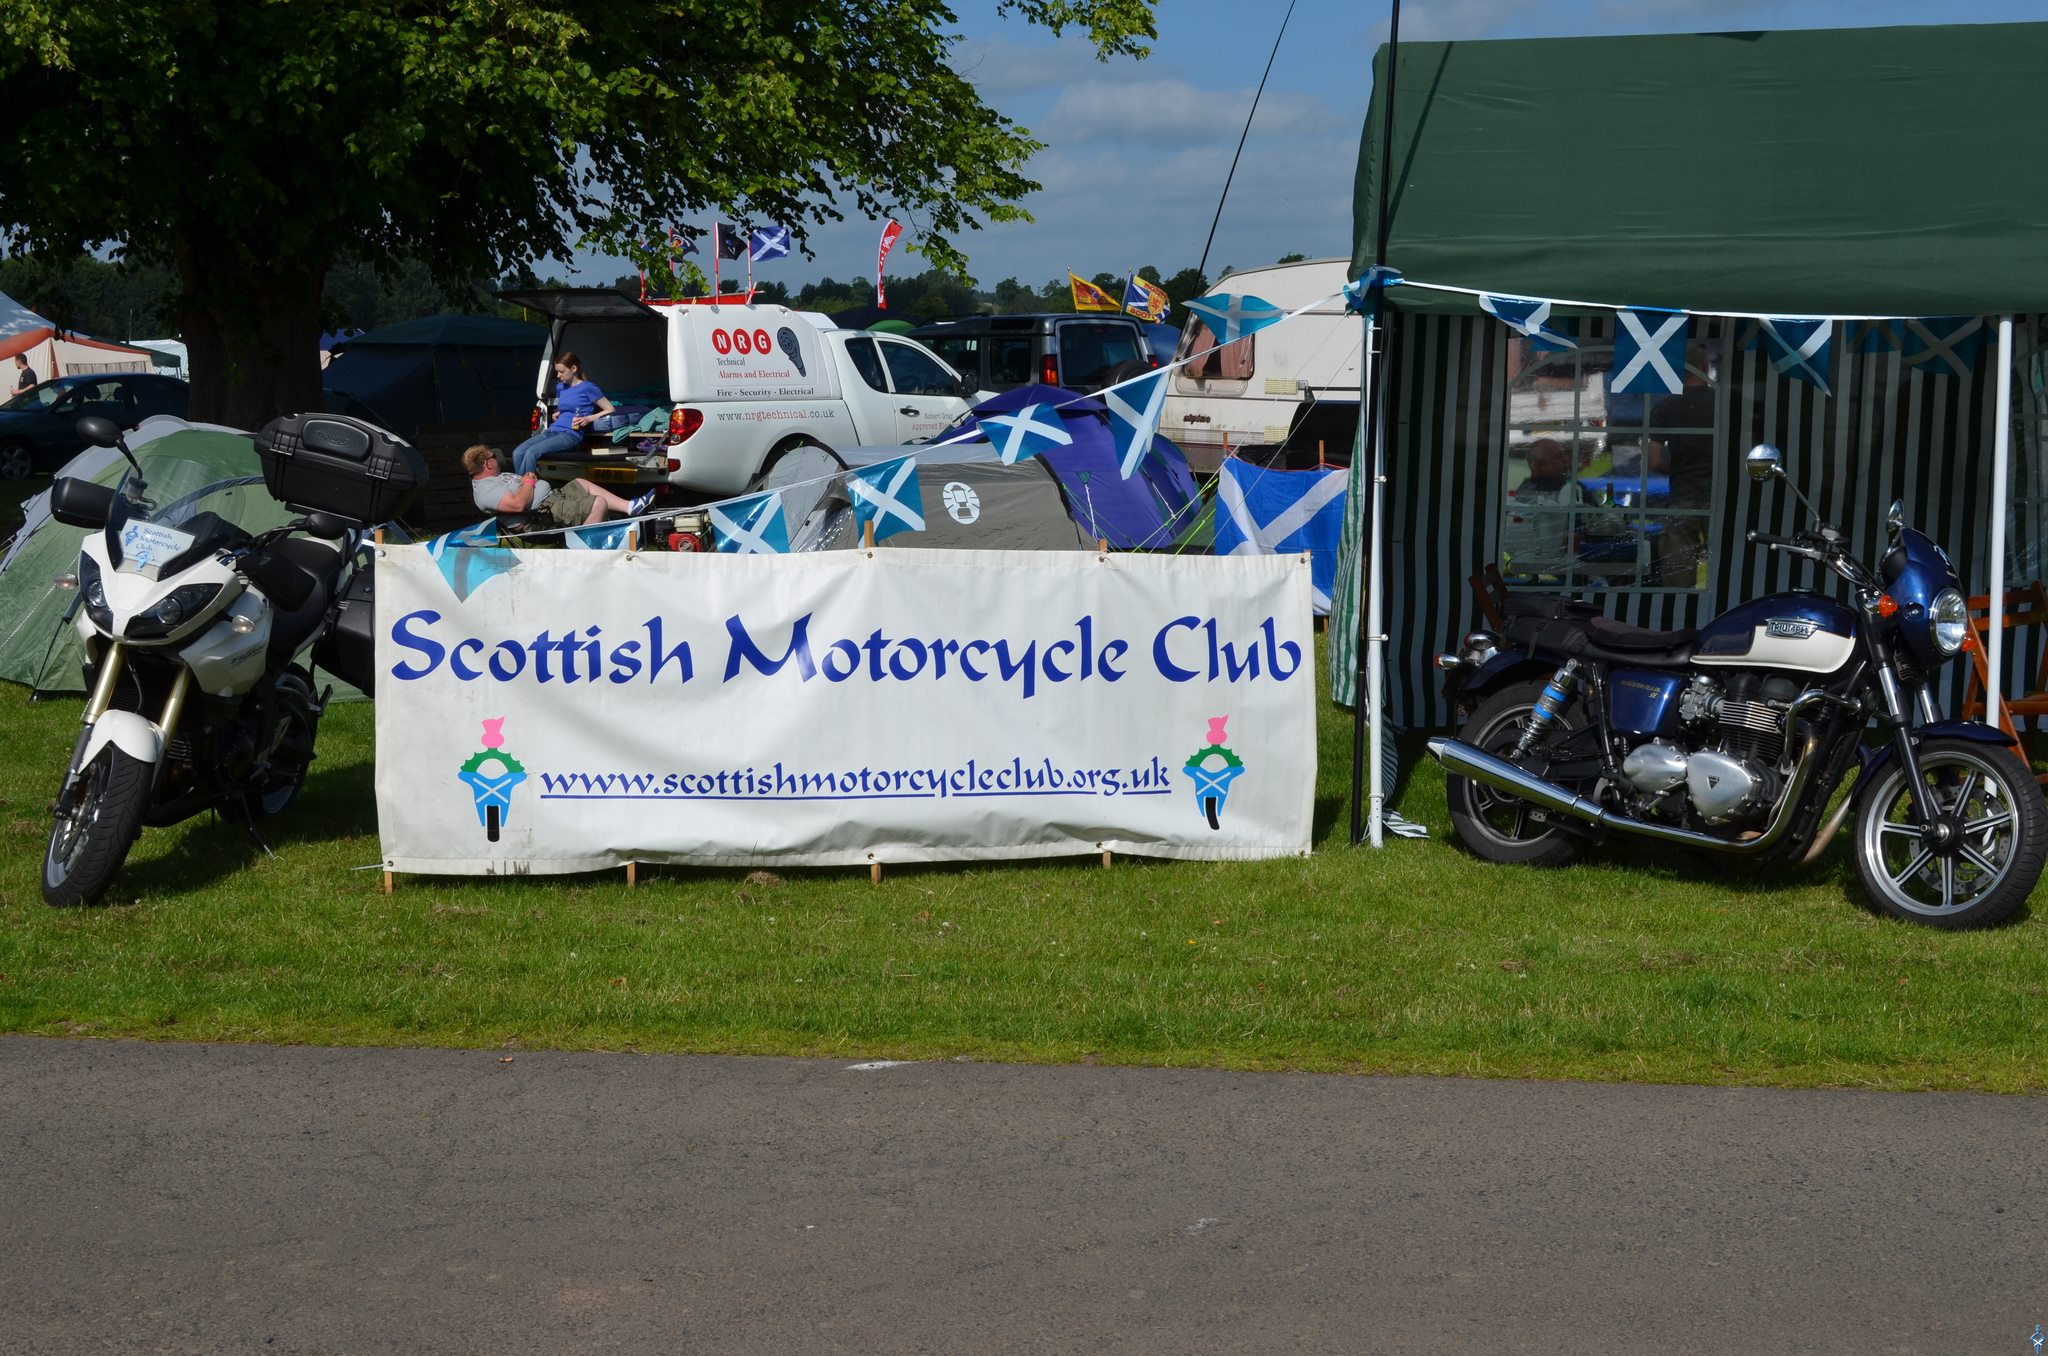 Scottish Motorcycle Club credit Facebook page